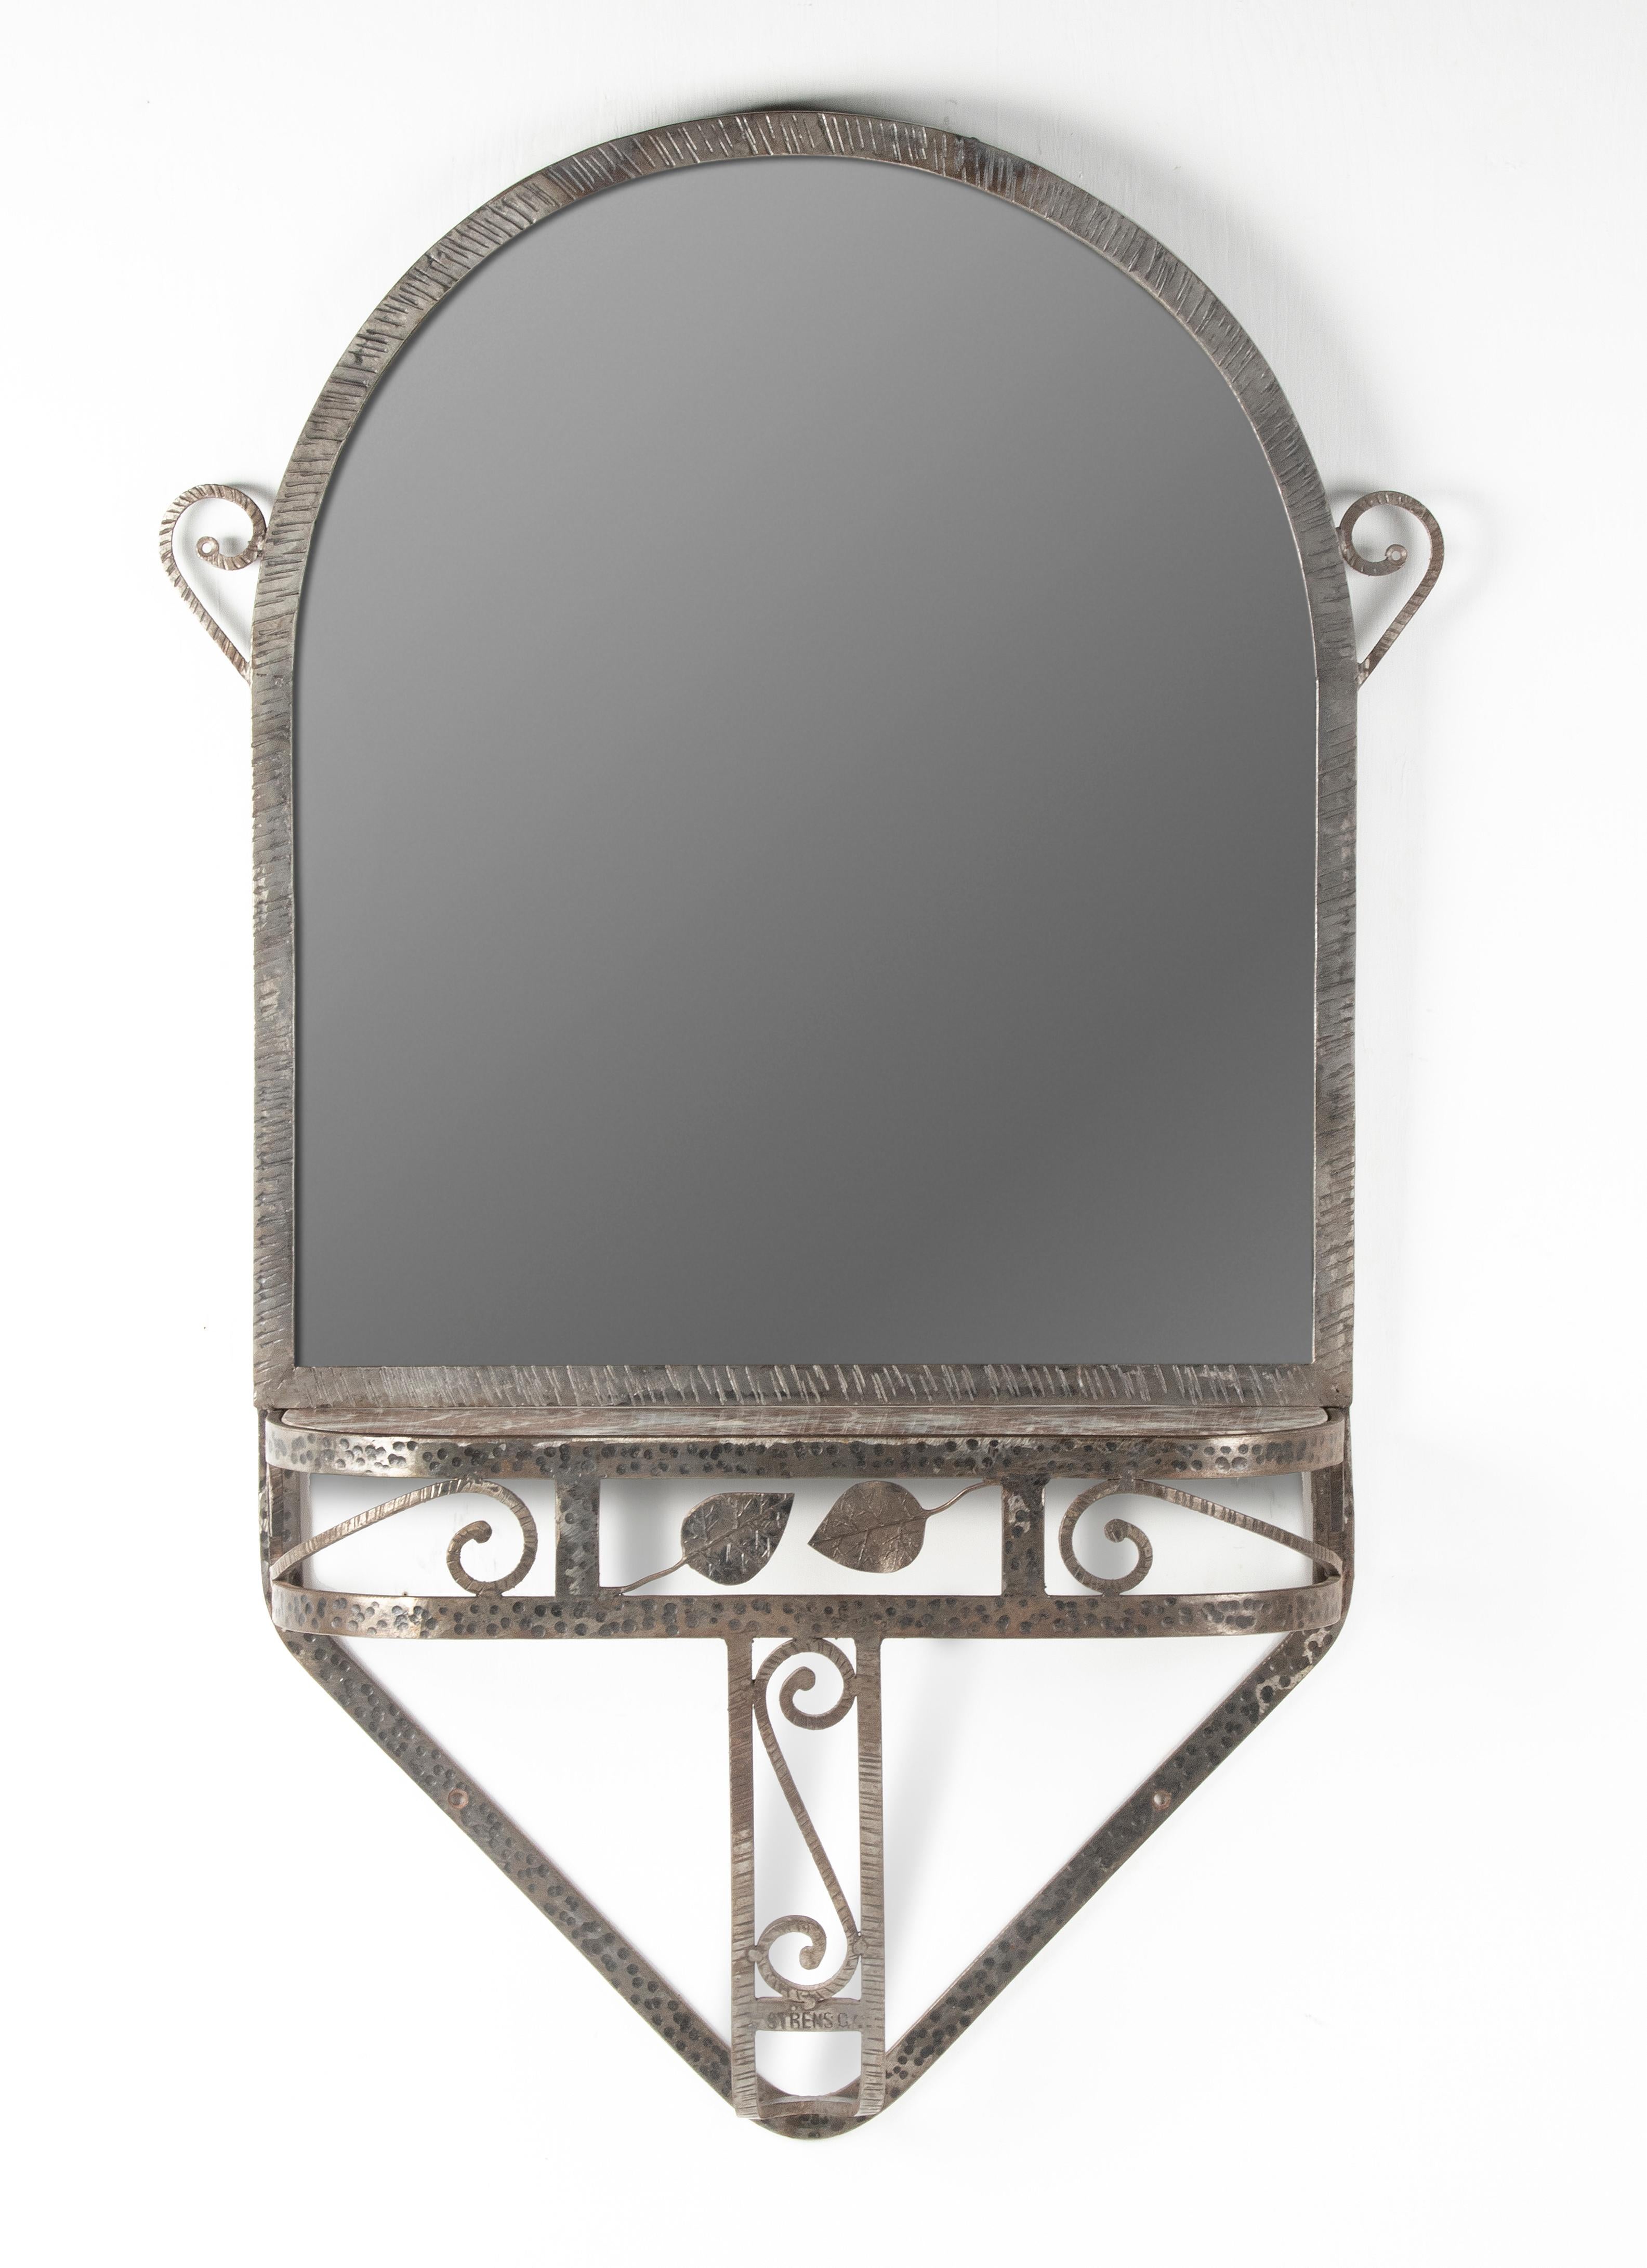 Forged Art Deco Period Wrought Iron Wall Mirror with Marble Console, Strens For Sale